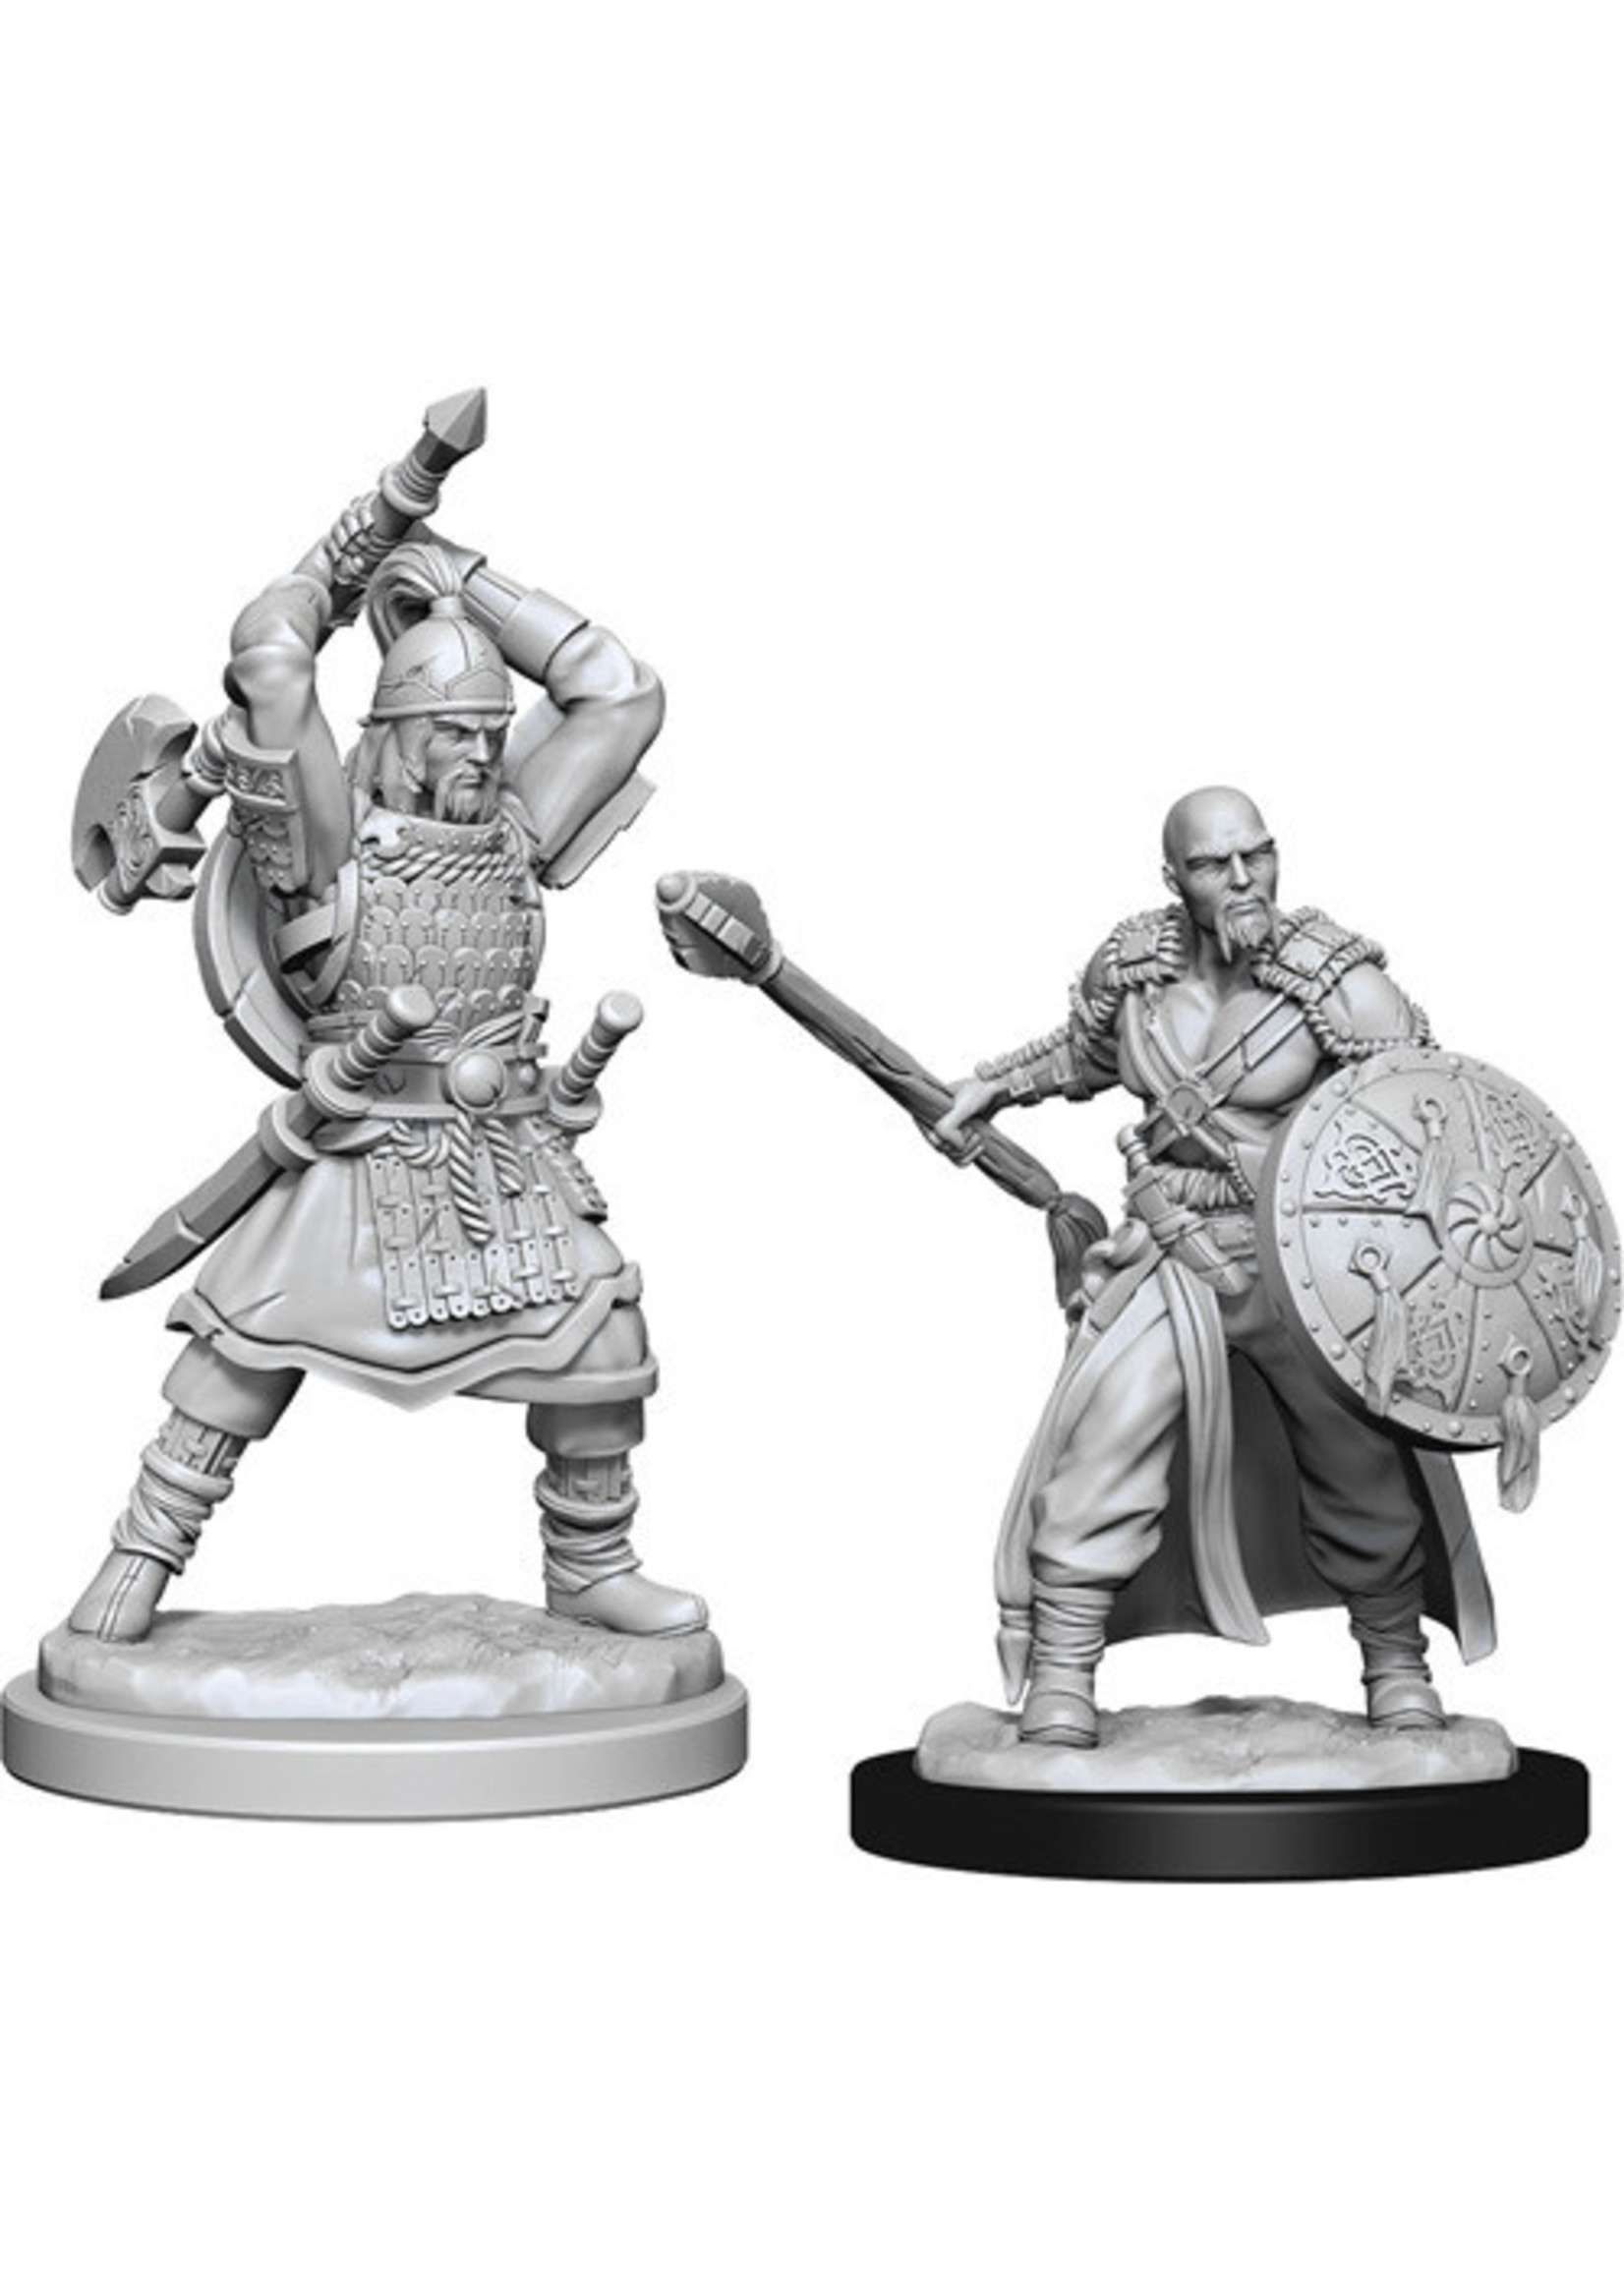 Dungeons & Dragons 5e Dungeons & Dragons Nolzur`s Marvelous Unpainted Miniatures: W13 Human Barbarian Male